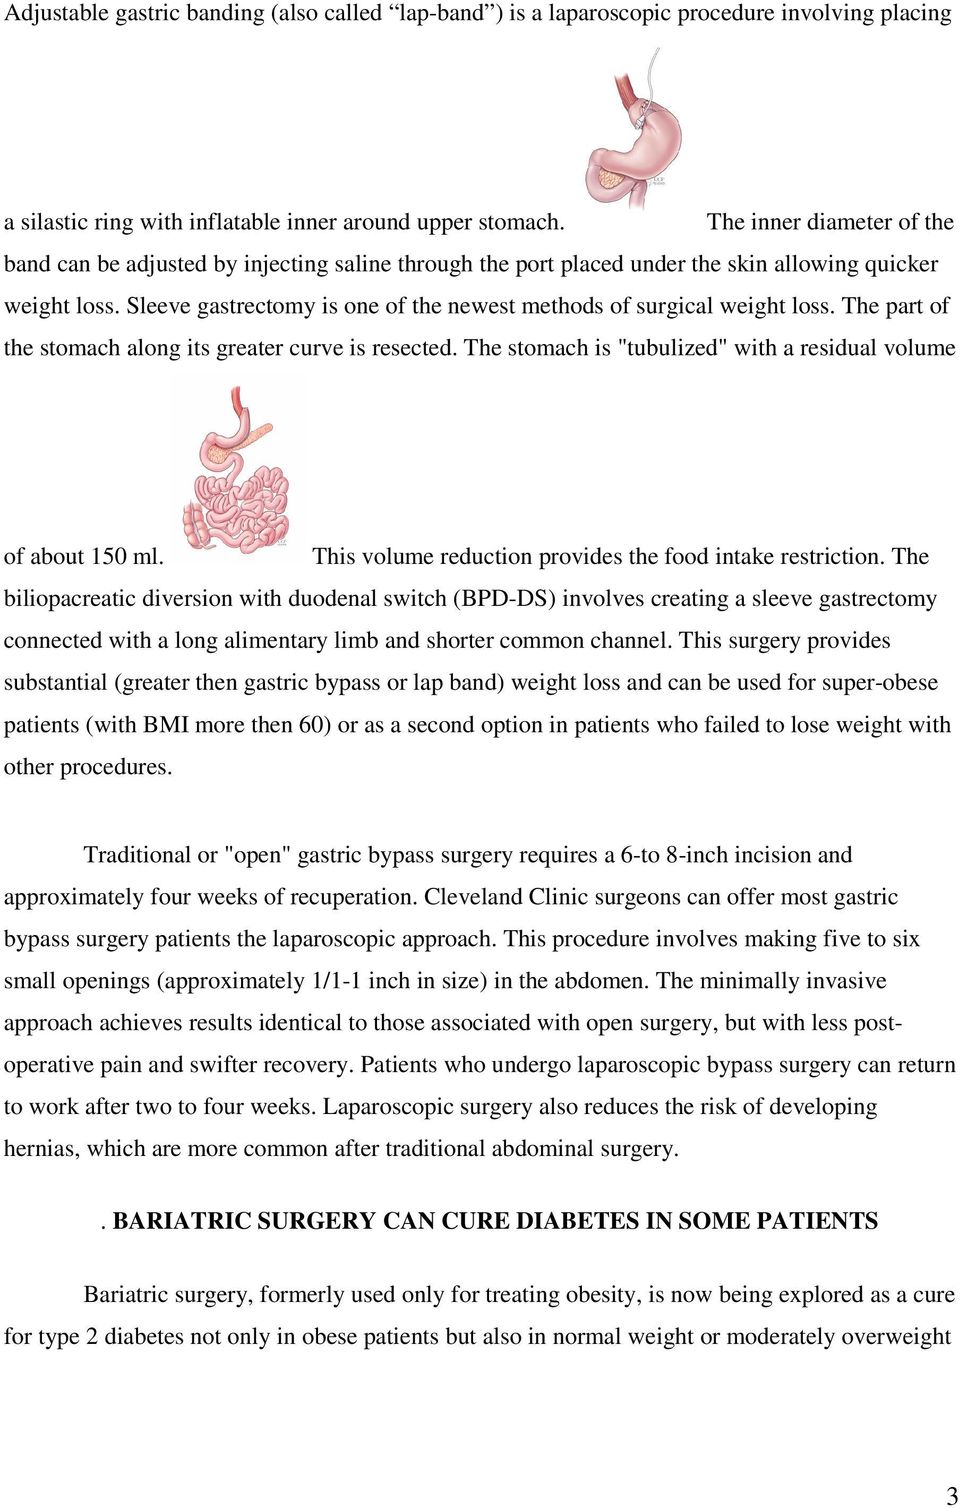 Sleeve gastrectomy is one of the newest methods of surgical weight loss. The part of the stomach along its greater curve is resected. The stomach is "tubulized" with a residual volume of about 150 ml.